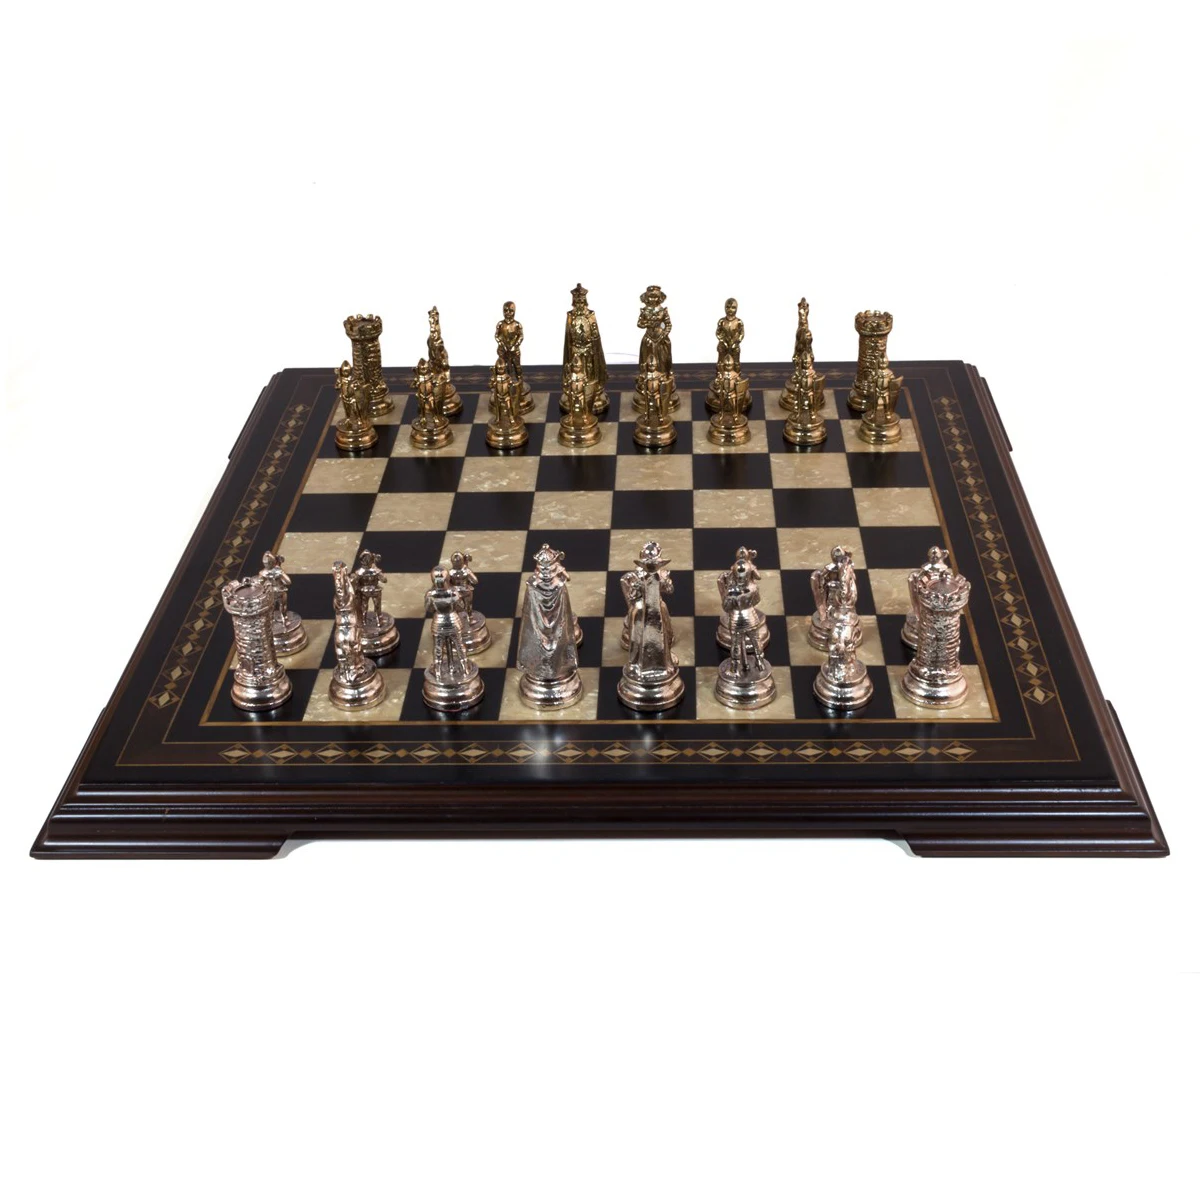 22.5'' Flat Footed Black Chessboard - Solid Beech Wood Mosaic Engraved Chess Board Game Gift Items Deck Box Checkers Шахматы